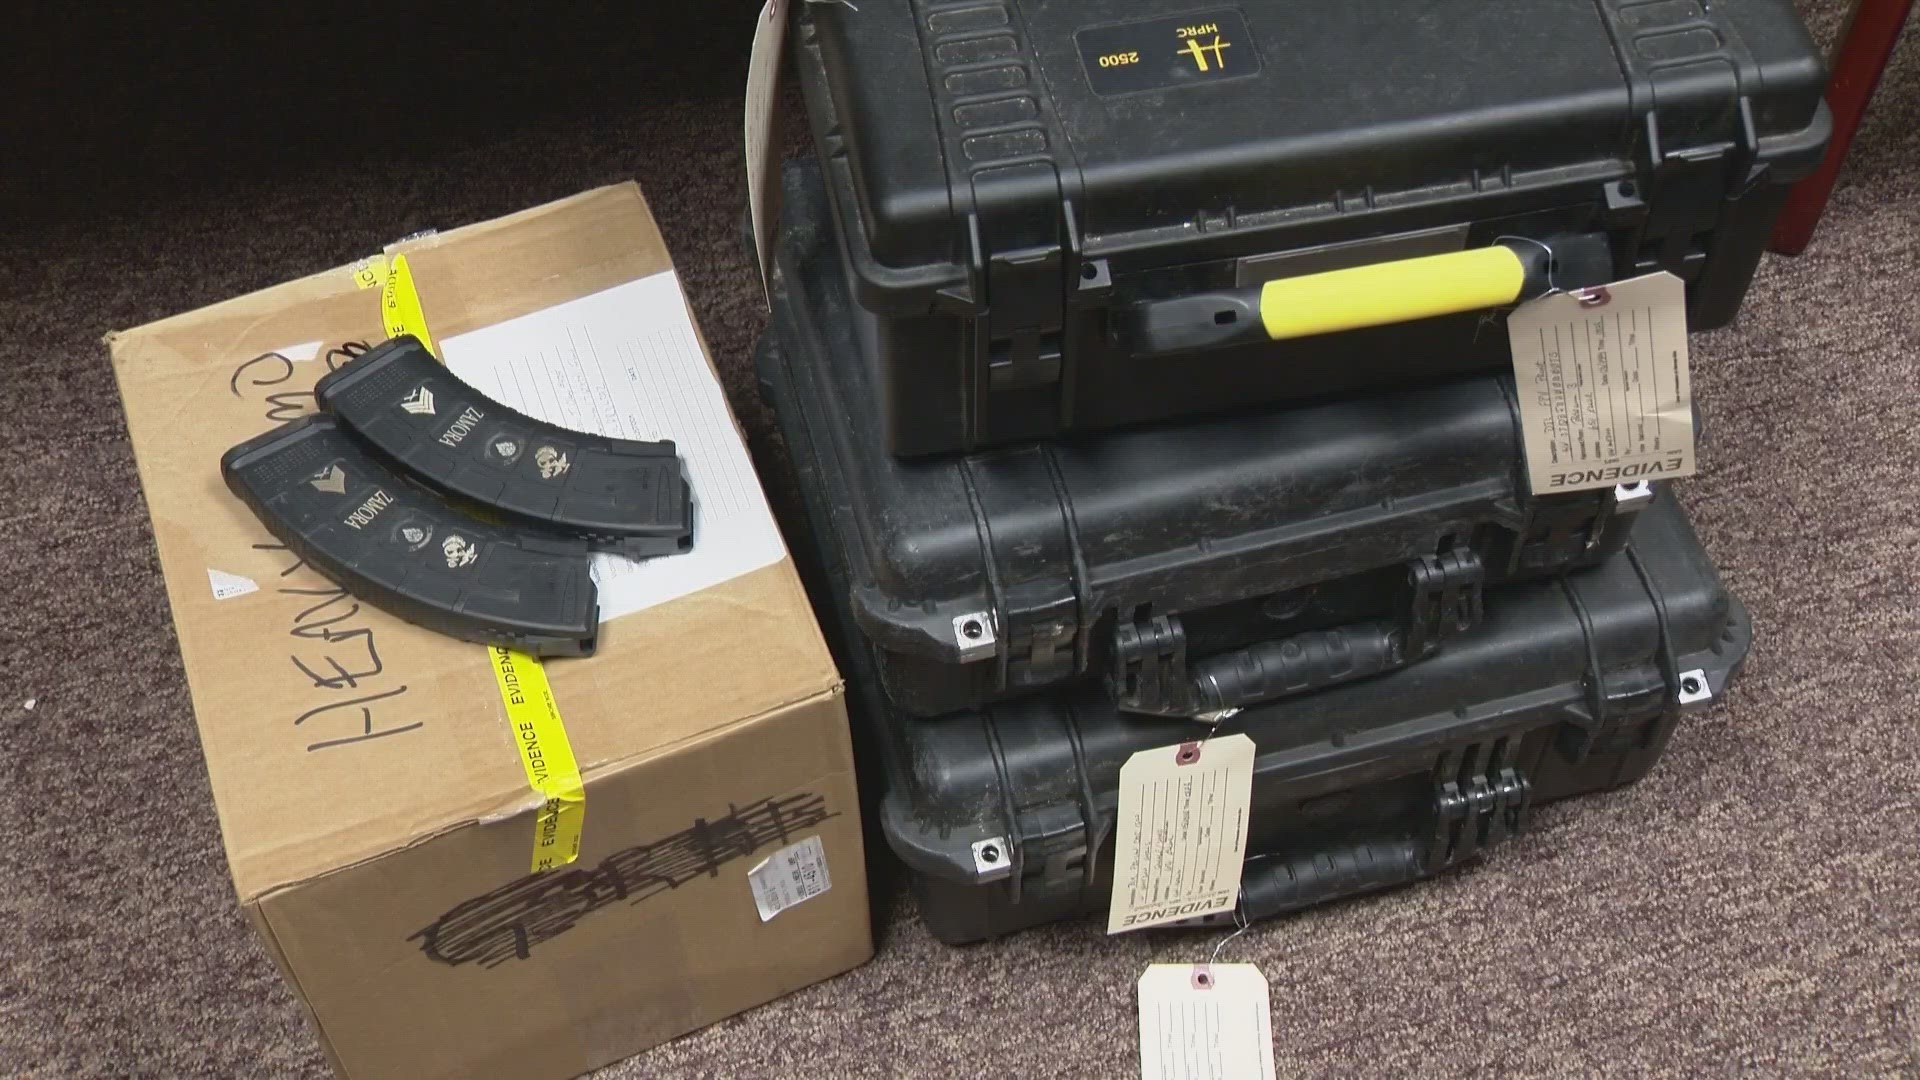 "Part of our job is to recover and return," said police, who found everything from personal documents and guns to purses and lawnmowers.